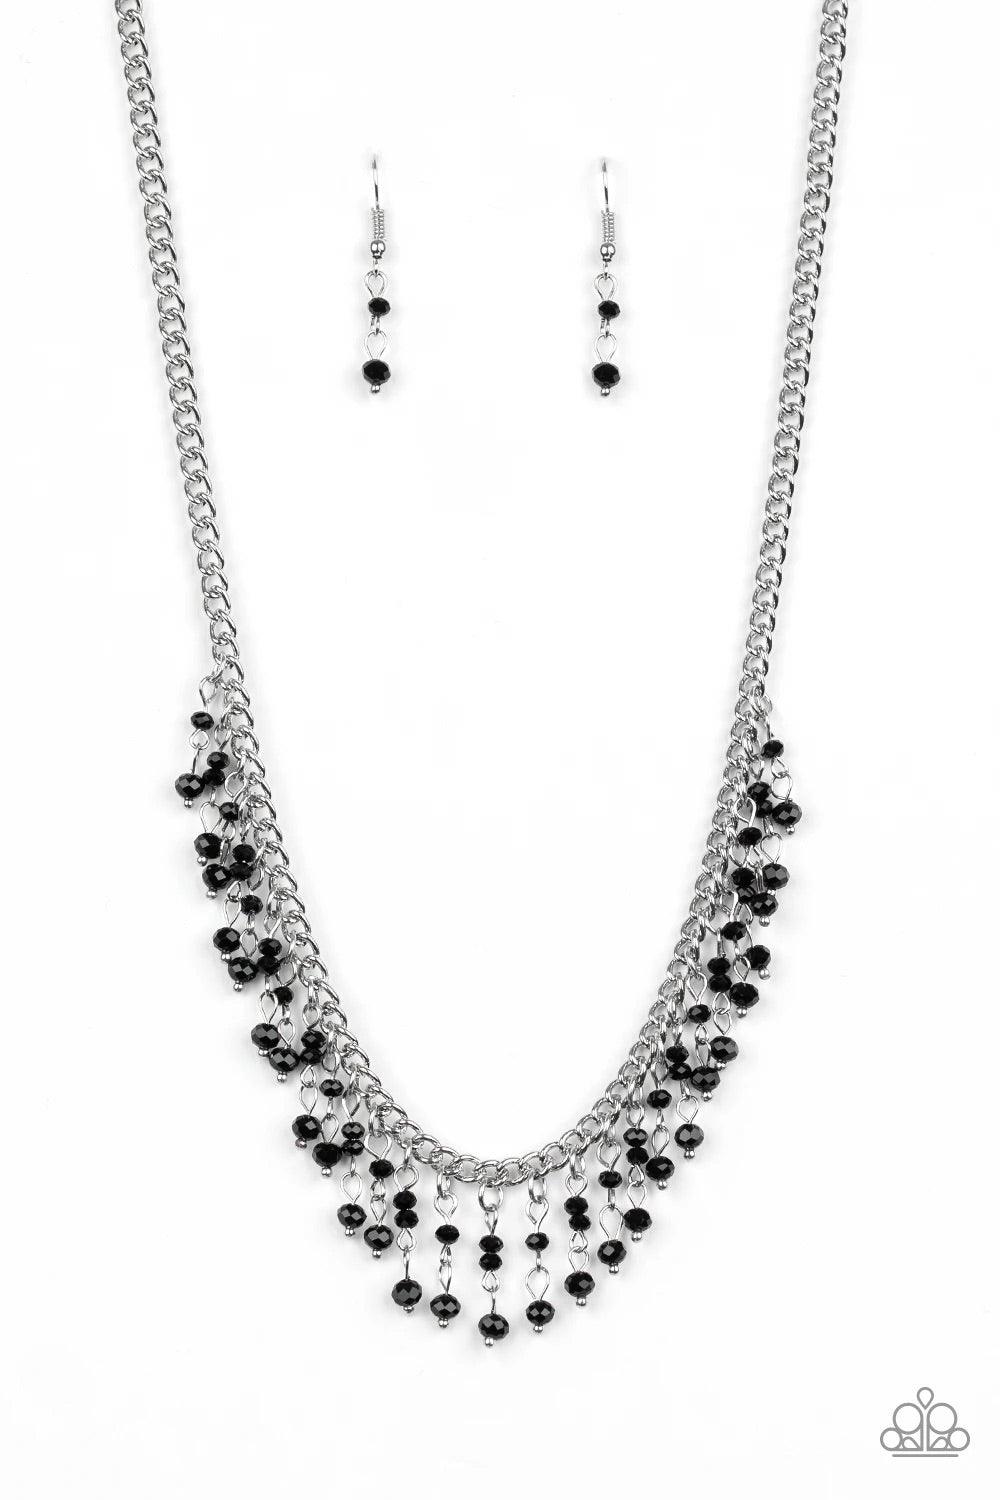 Paparazzi Accessories Sporadic Sparkle - Black A collection of dainty black crystal-like beads are threaded along stacks of metallic rods, creating a twinkling fringe below the collar. Features an adjustable clasp closure. Sold as one individual necklace.